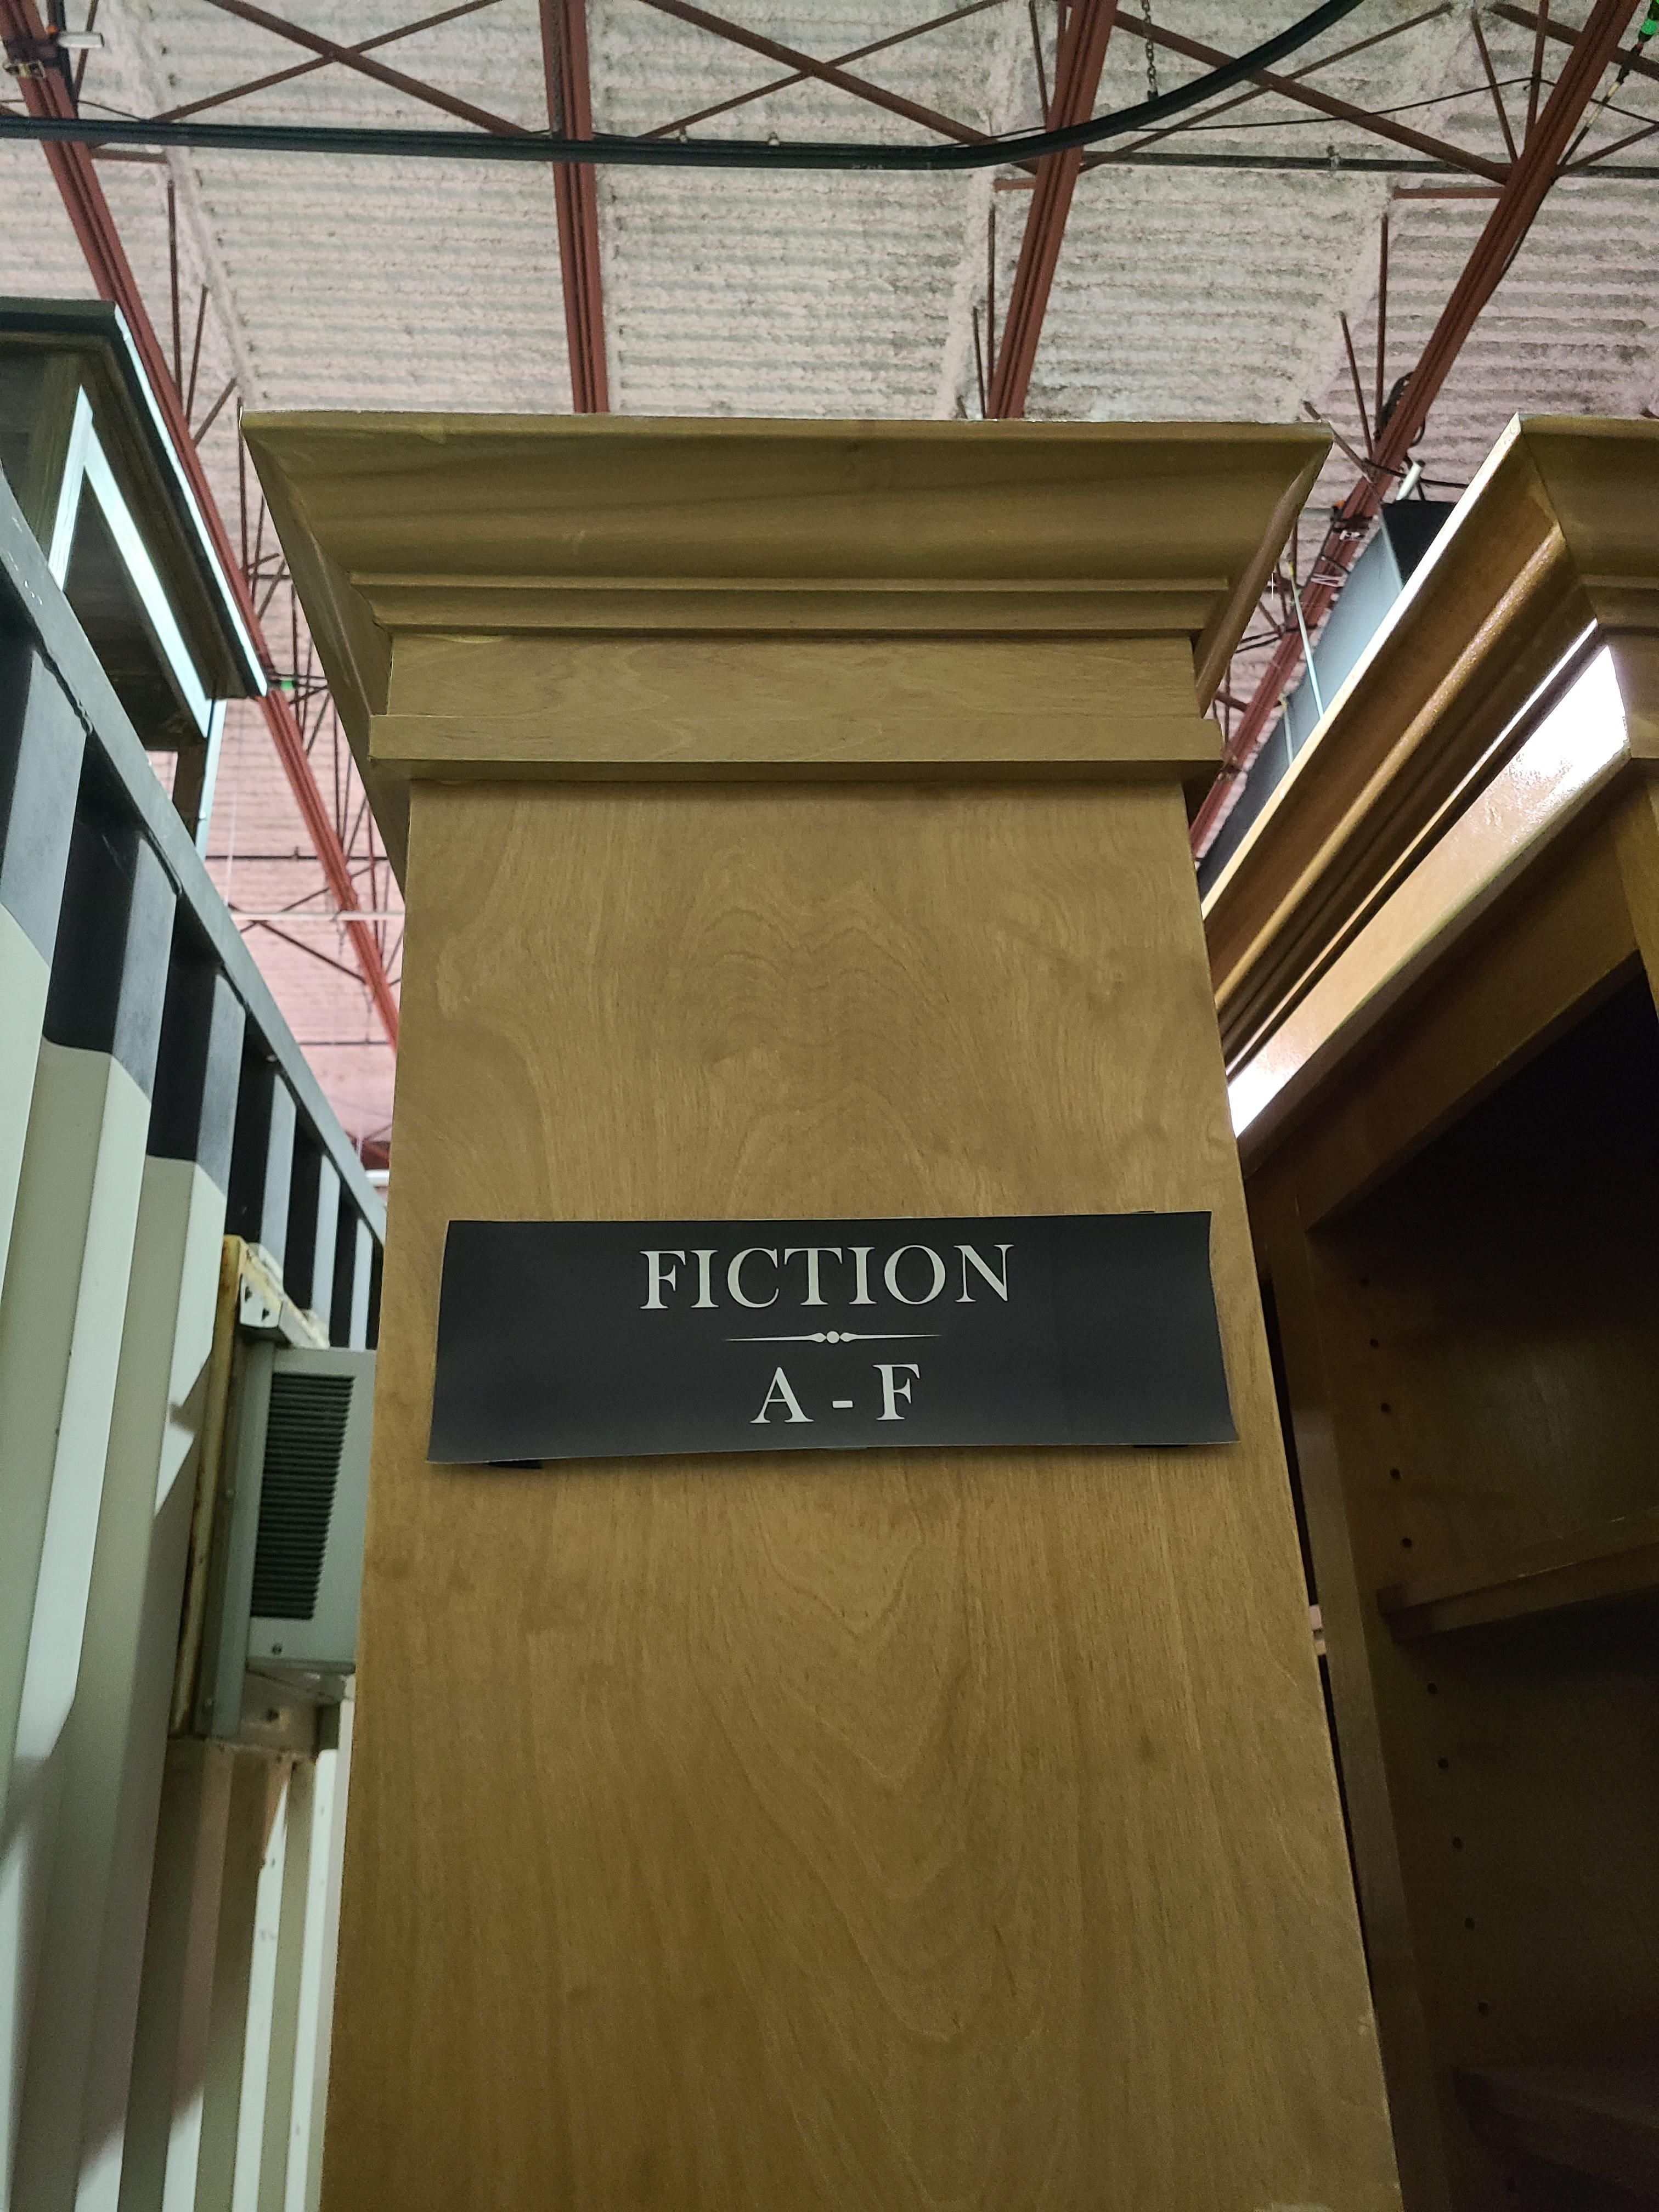 This must be where they keep the super-fiction stuff.